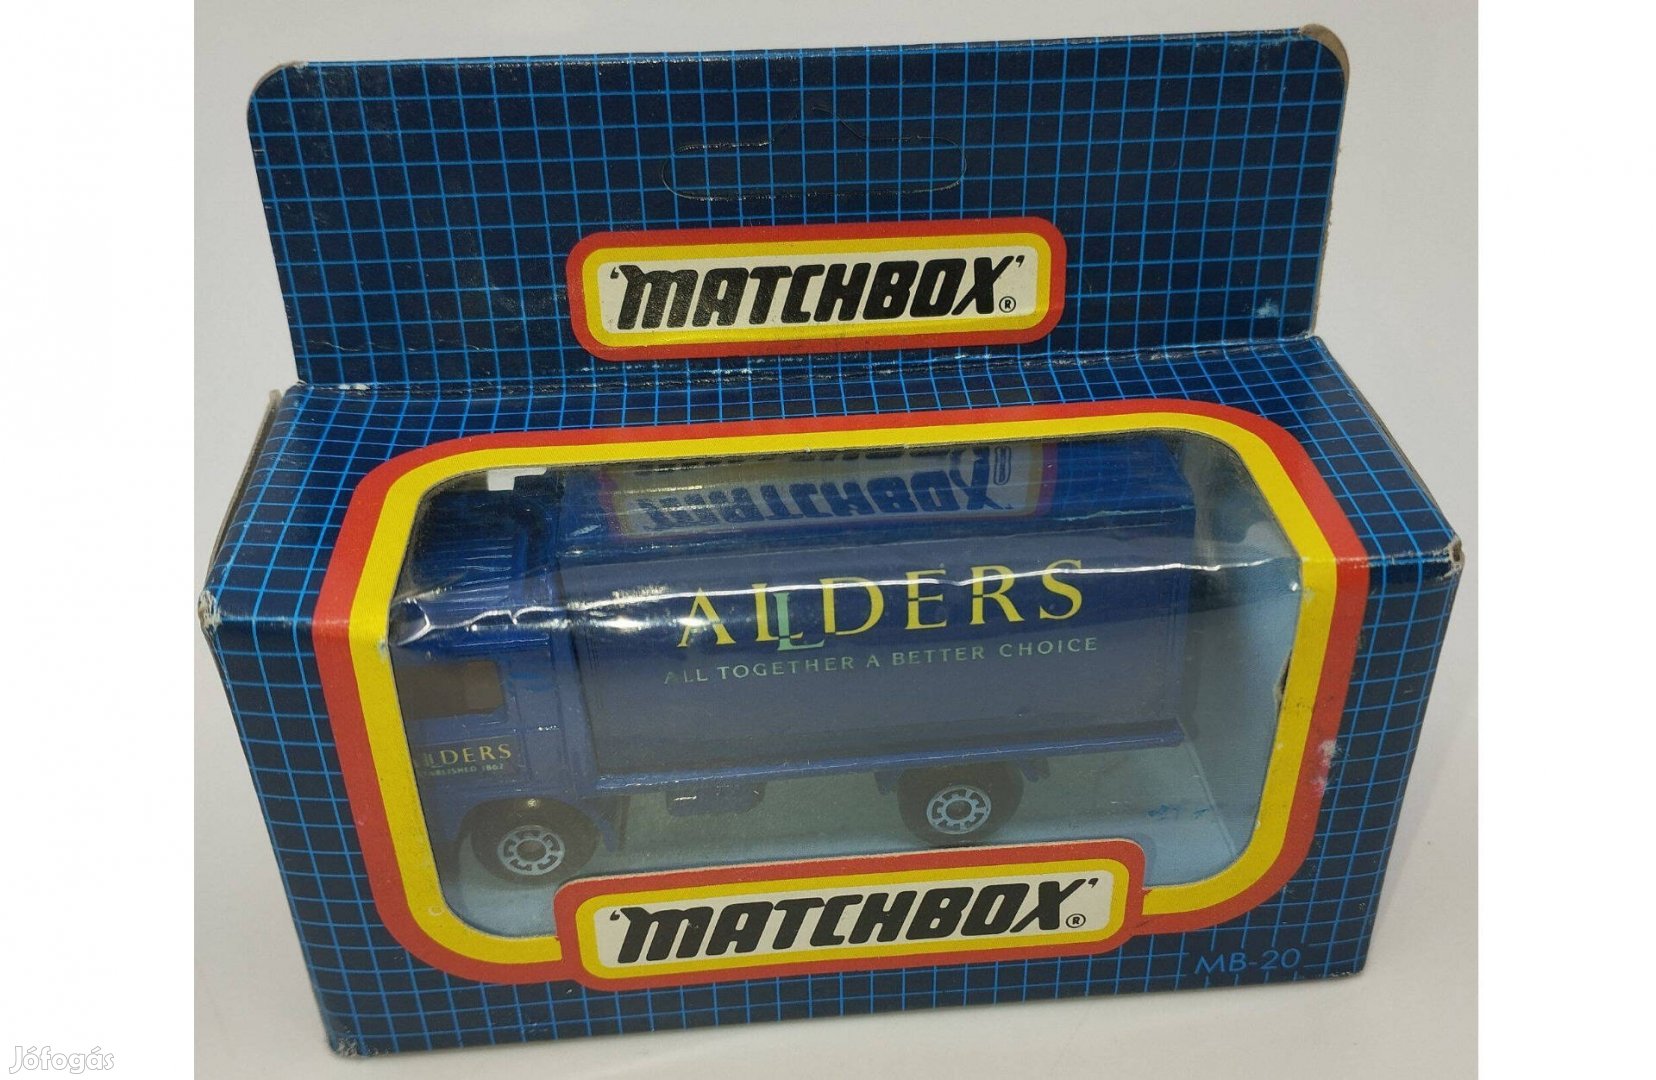 Matchbox MB-20 Volvo Container Truck Allders